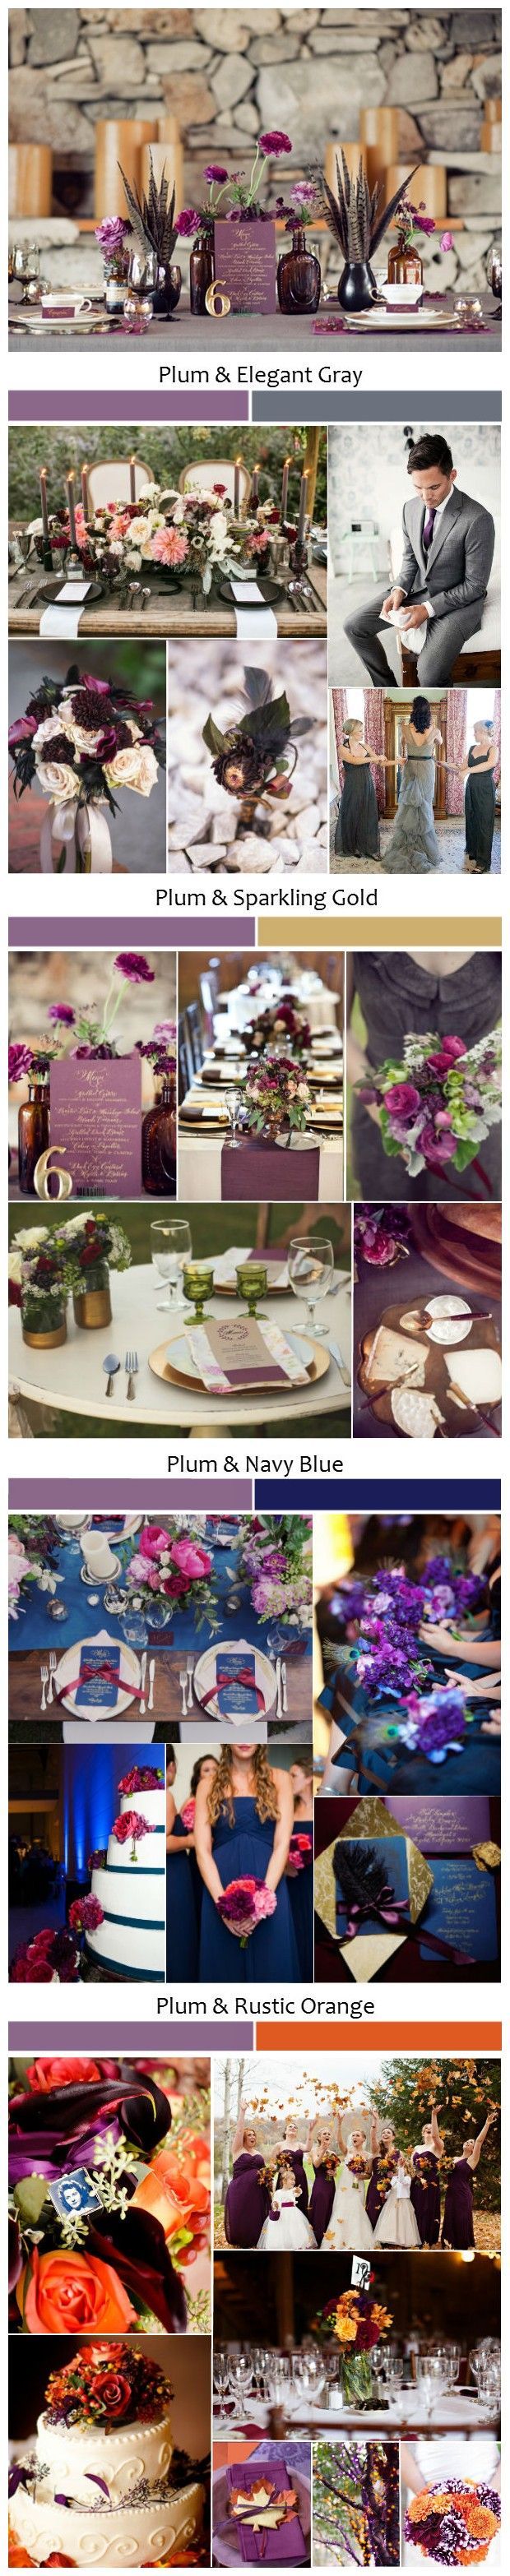 Top 5 Rustic Shades of Plum Wedding Ideas…plum so much elegant and class than just purple lol